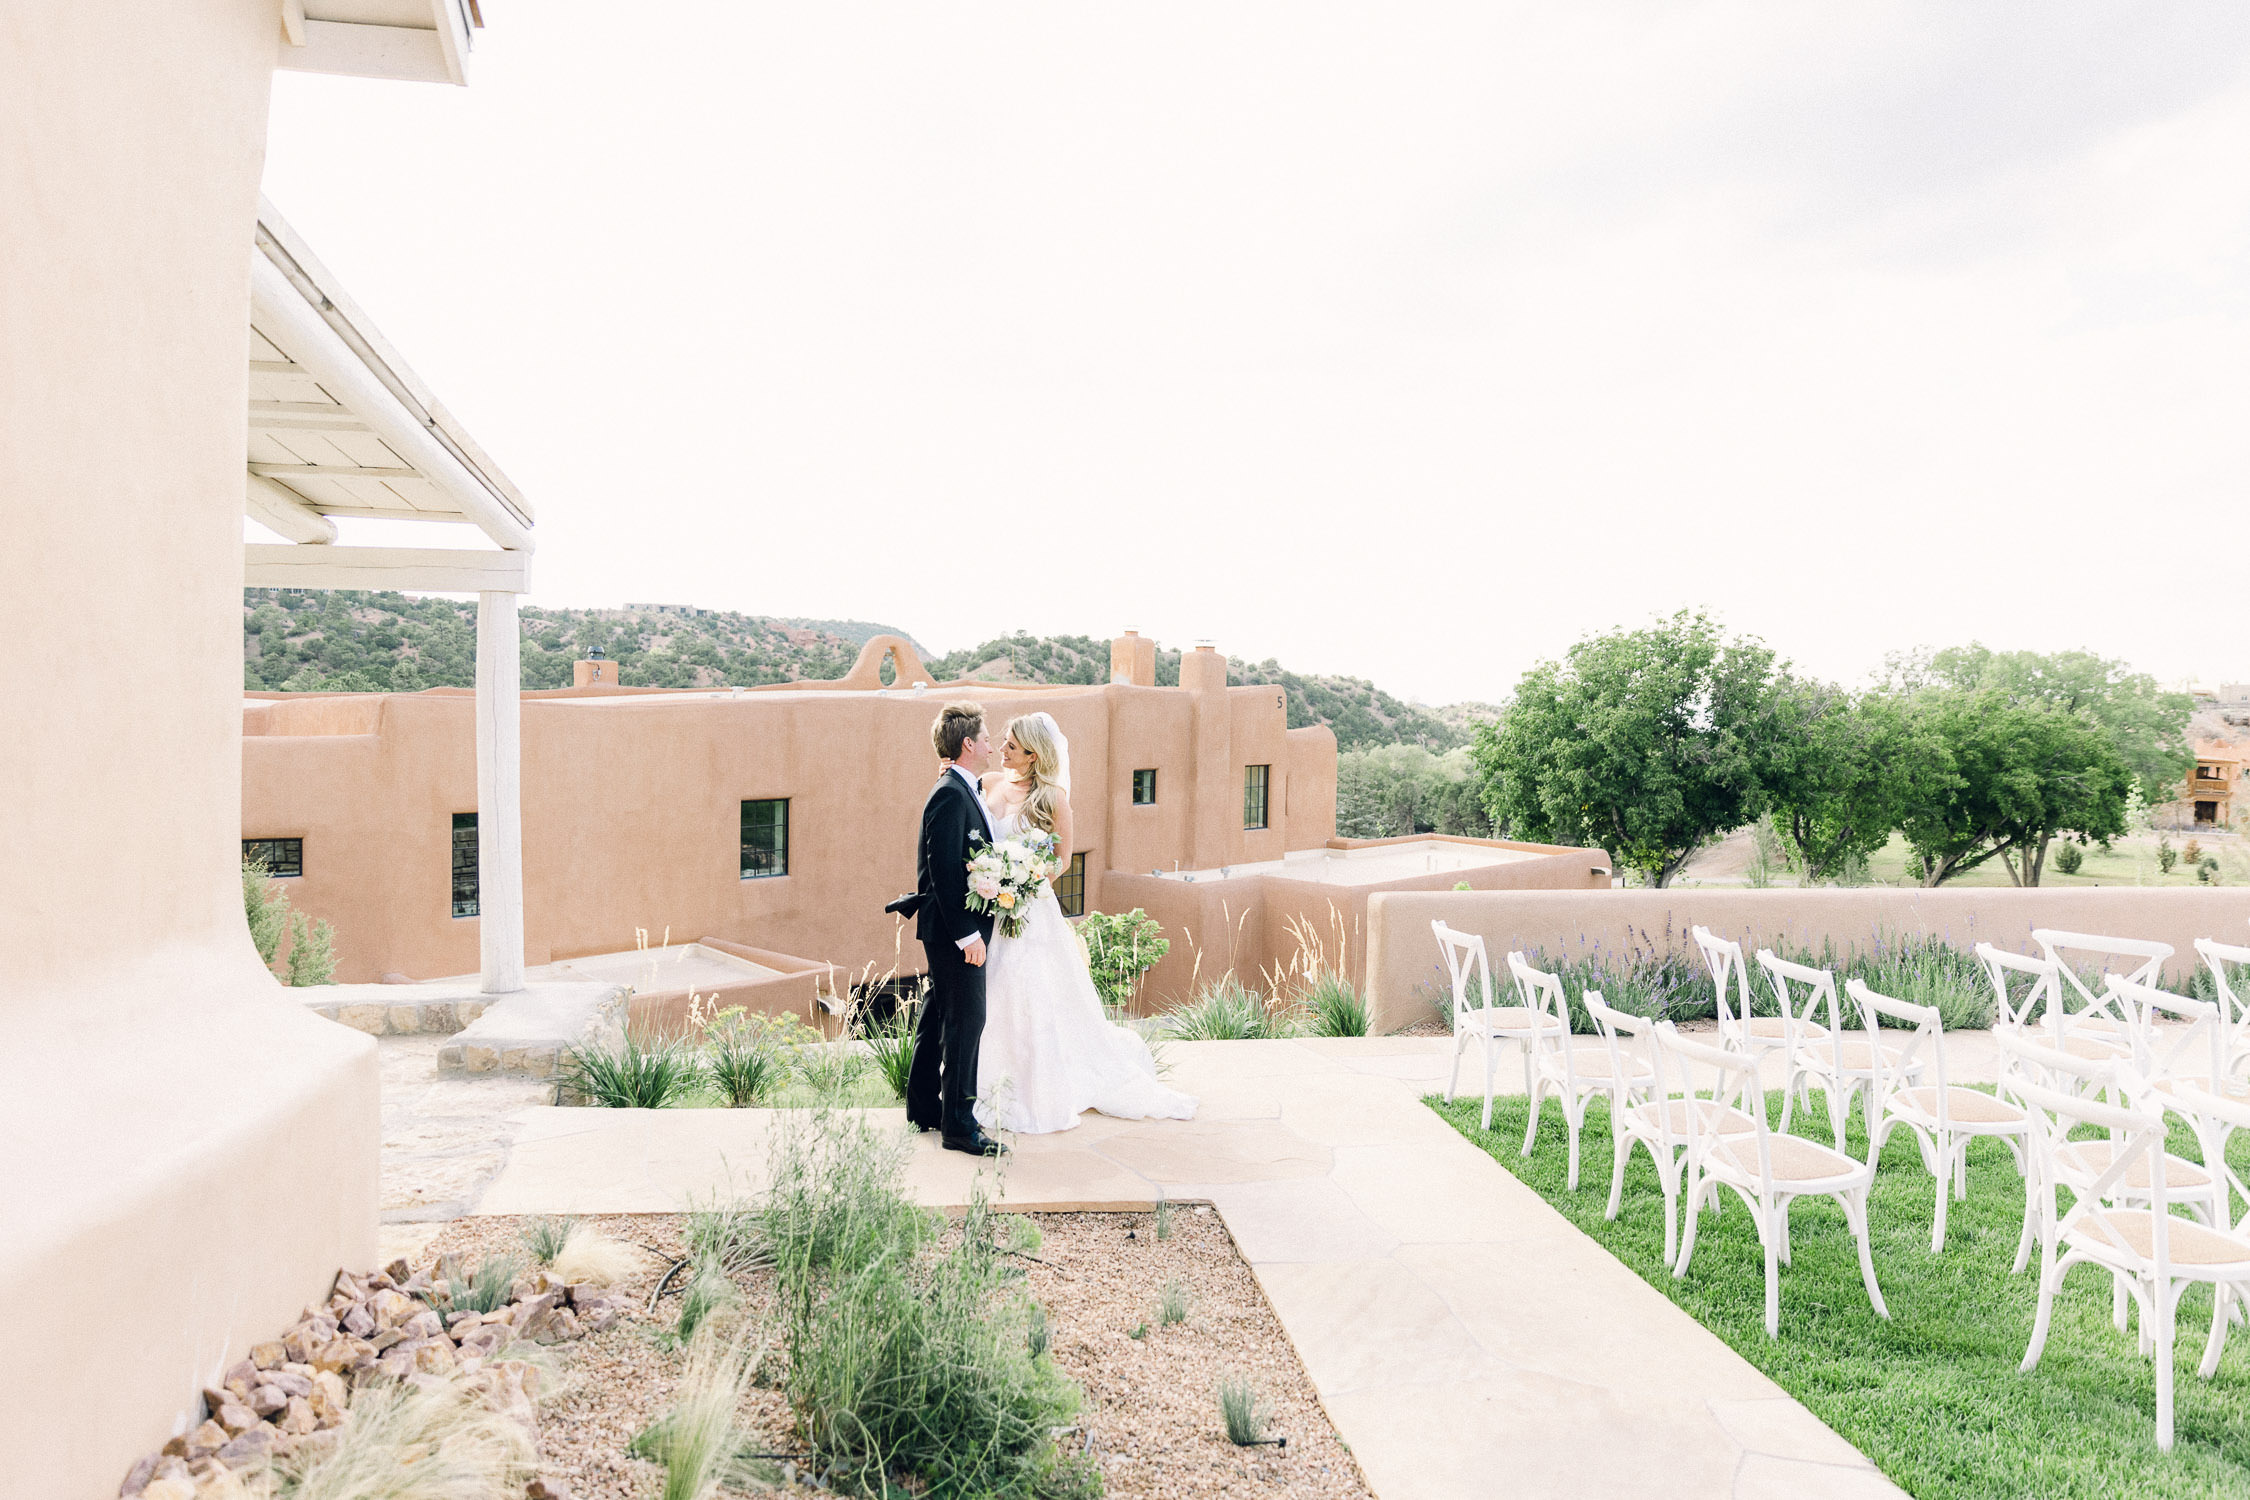 Bride and Groom stand in front of adobe buildings after their wedding ceremony.